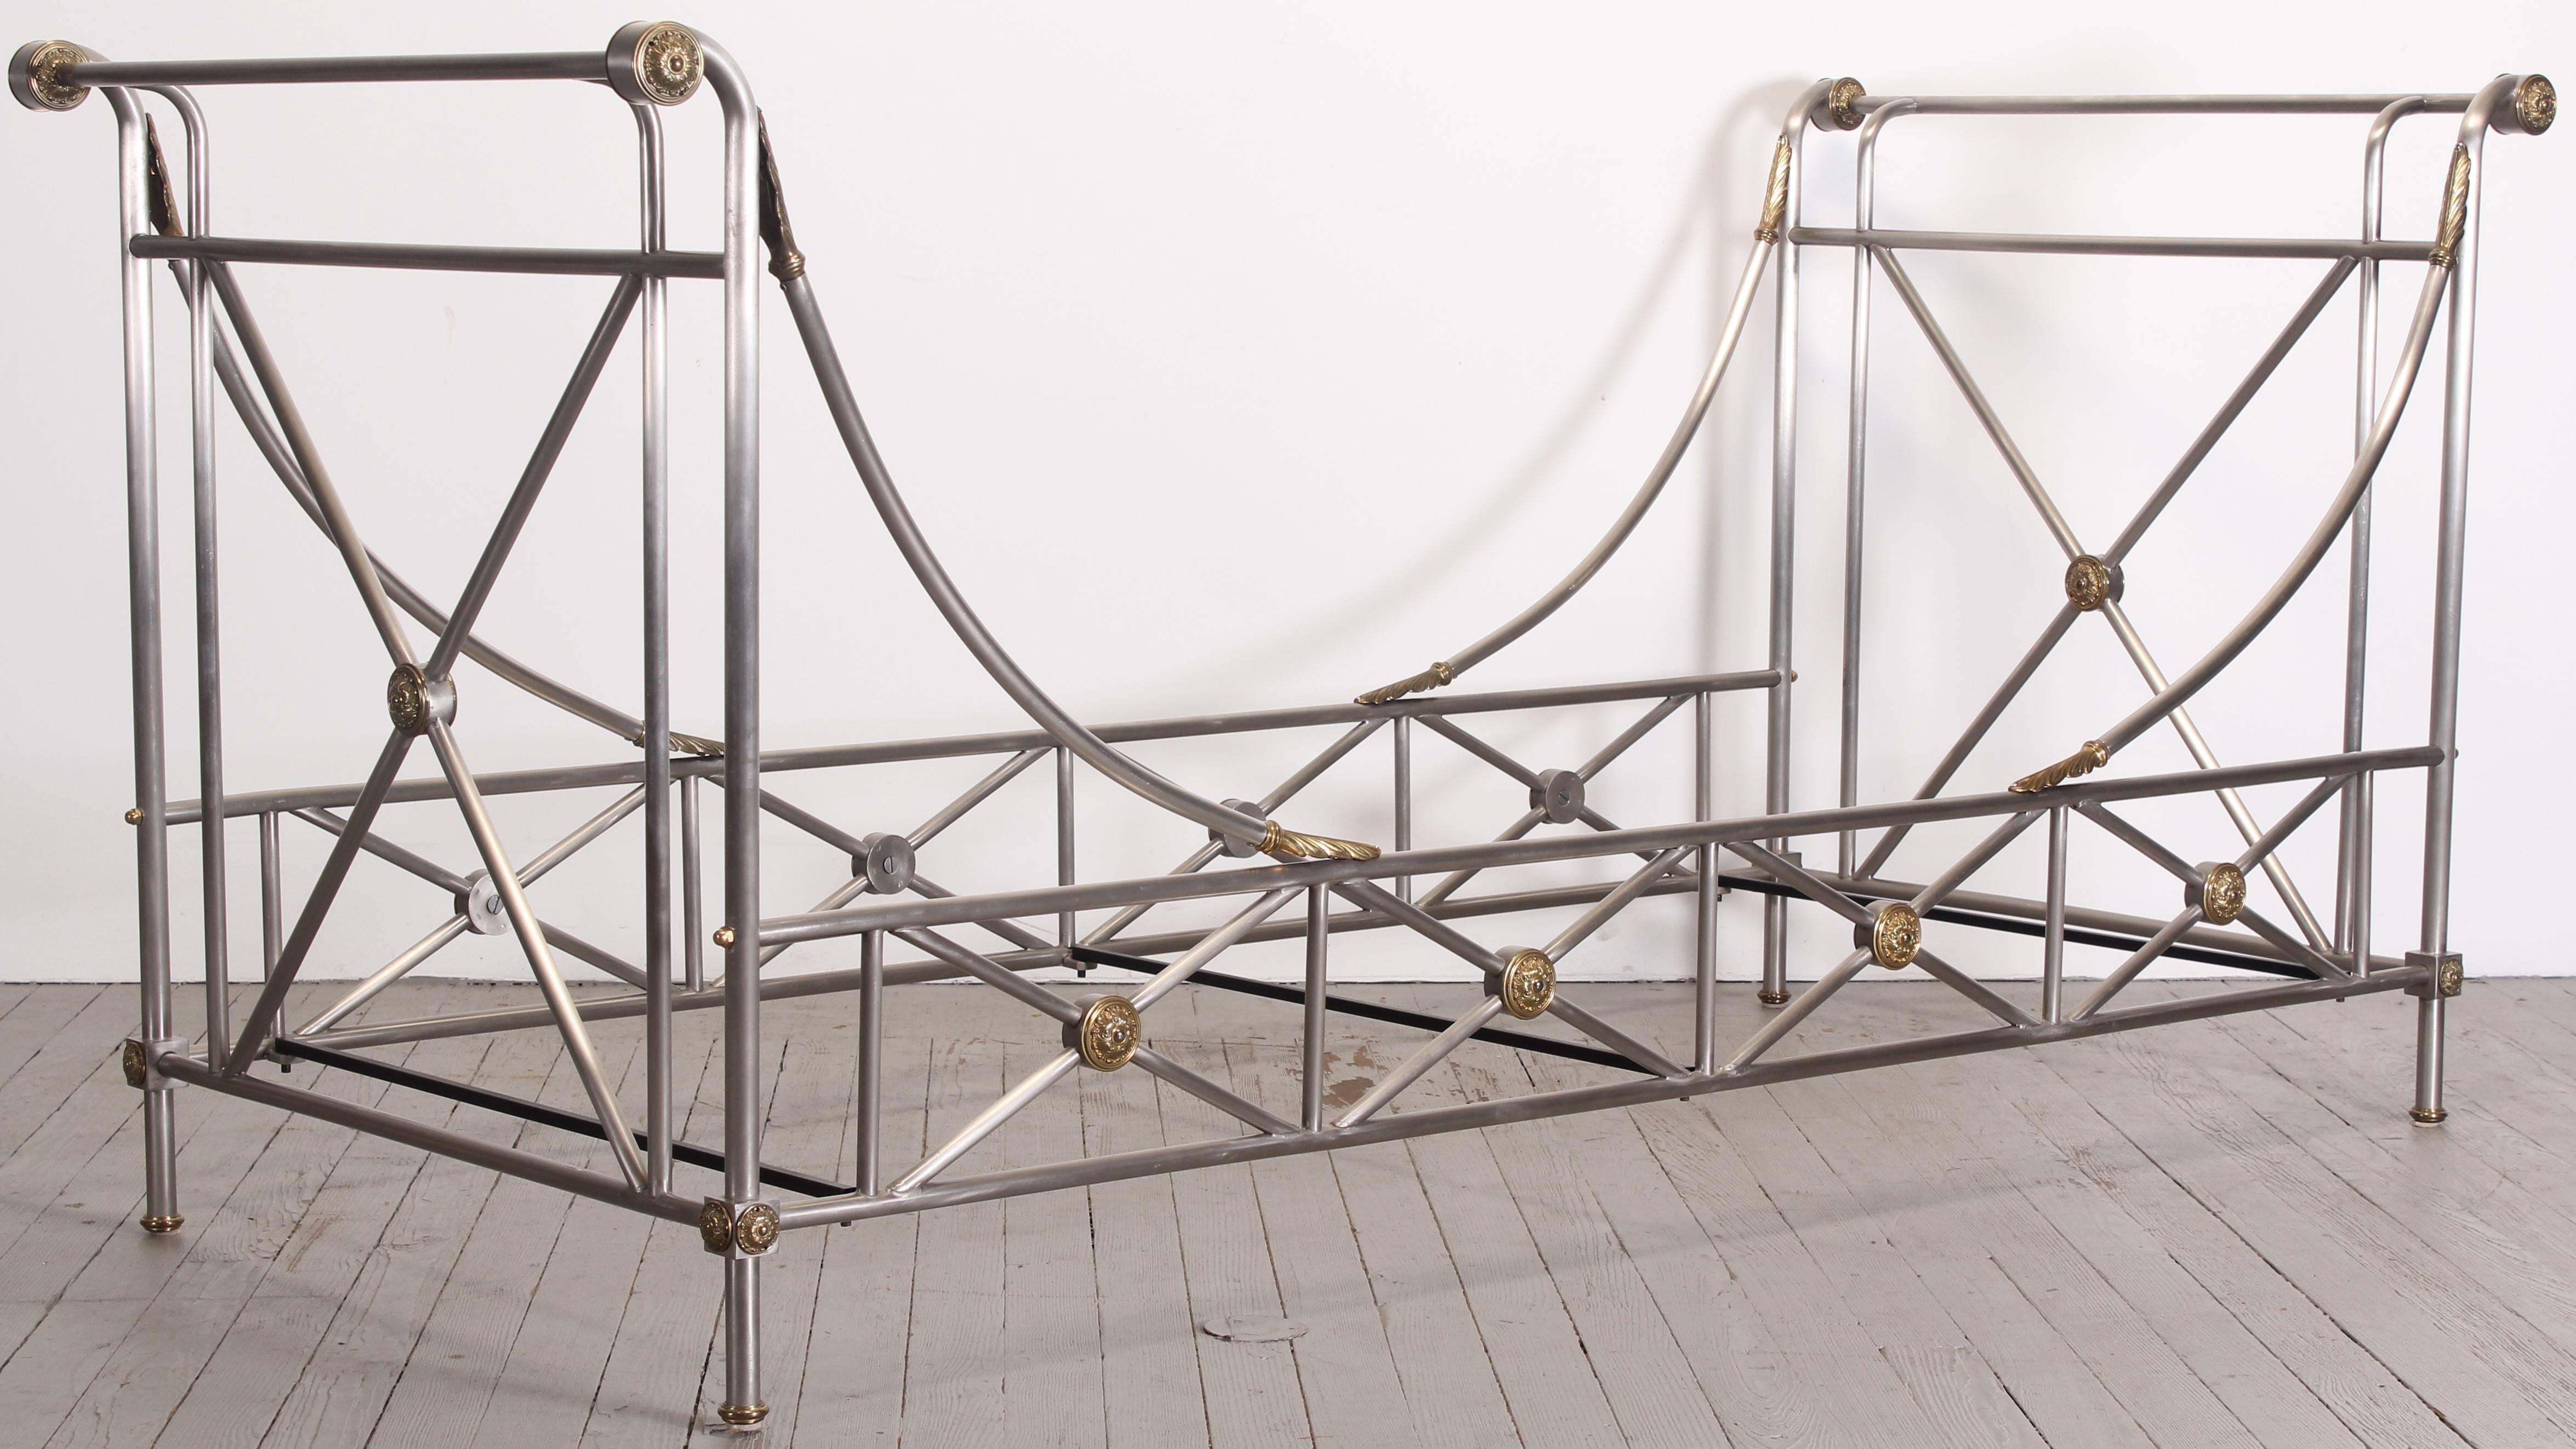 A stainless steel and brass Directoire/Neoclassical style daybed, possibly by Maison Jansen.

In very good condition, includes three metal mattress supports. Disassembles, making it easy to deliver and place.

Frame dimensions: 40.13" H x